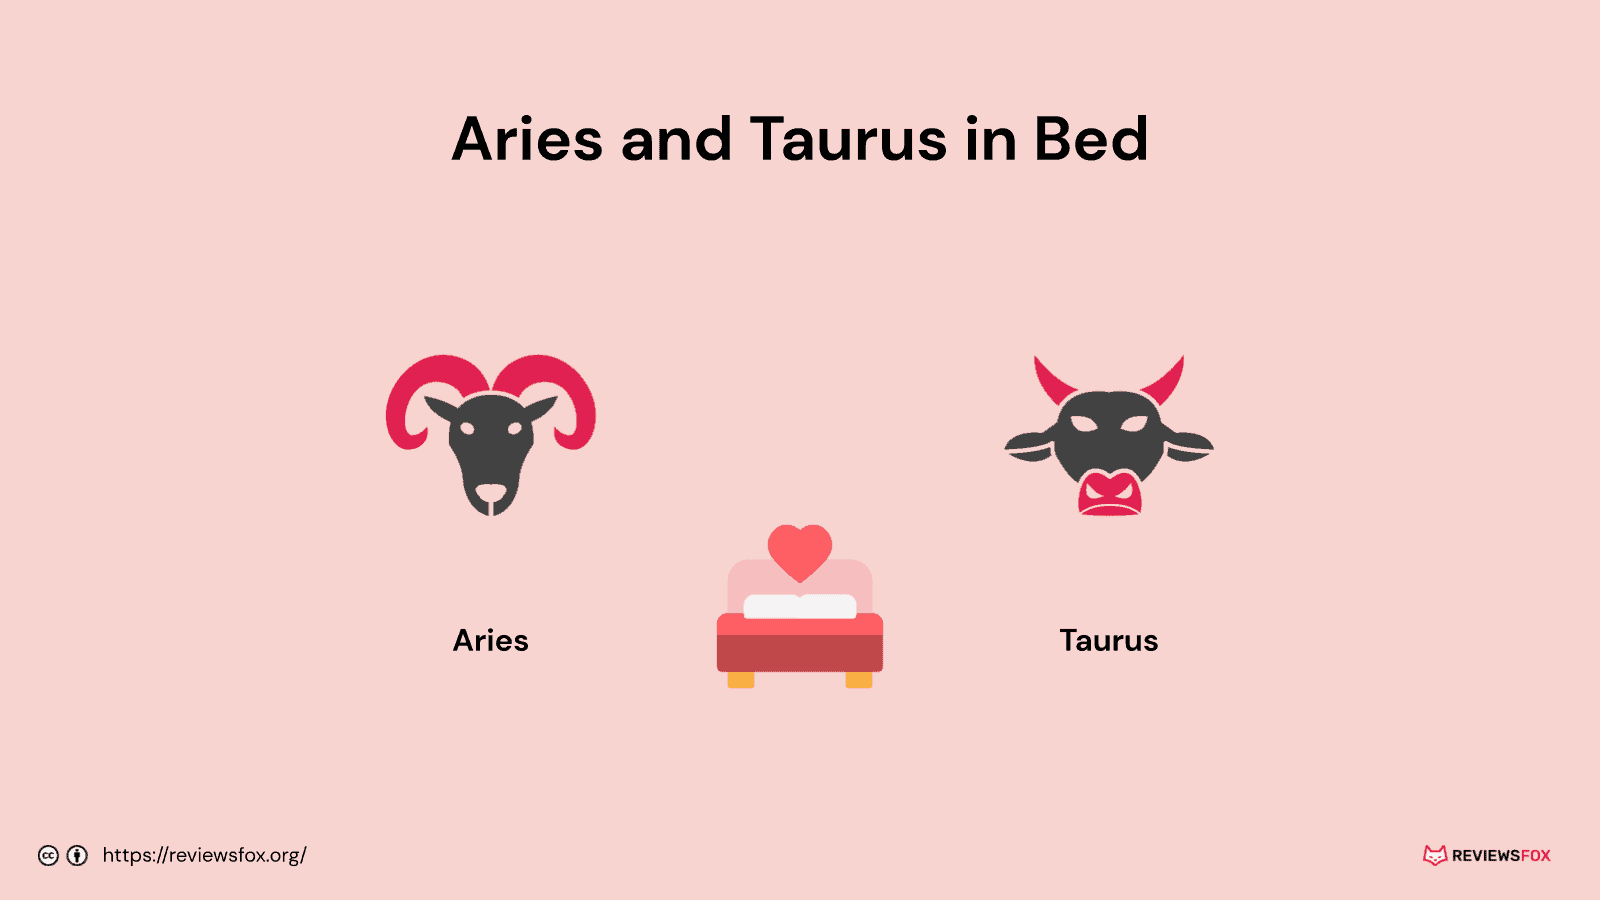 Aries and Taurus in bed